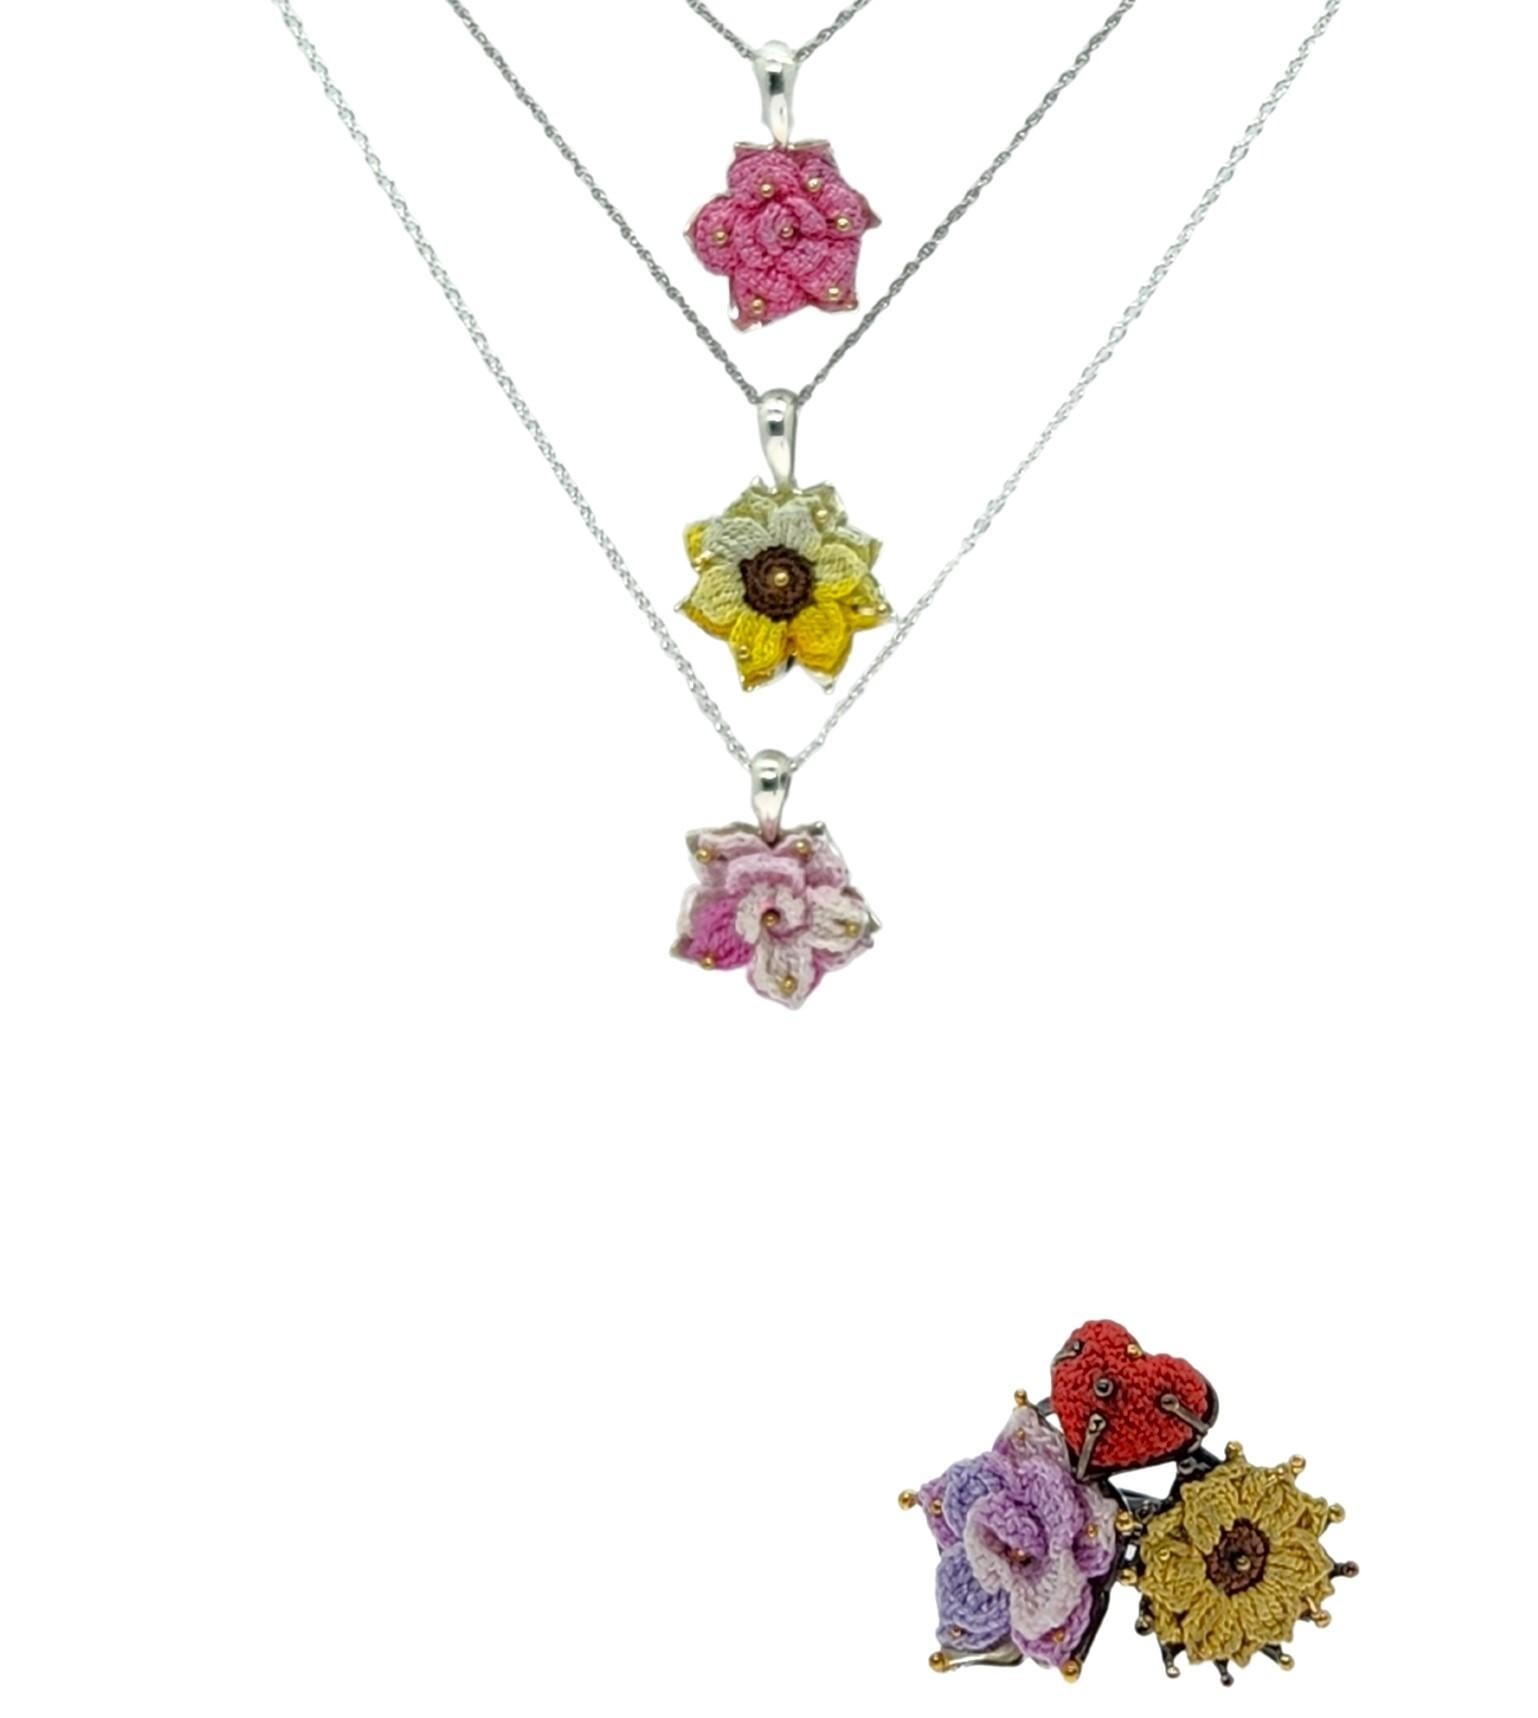 Hand Knit Flower Necklace in Handmade Sterling Silver and 14KY Gold Setting #2 In New Condition For Sale In Rutherford, NJ